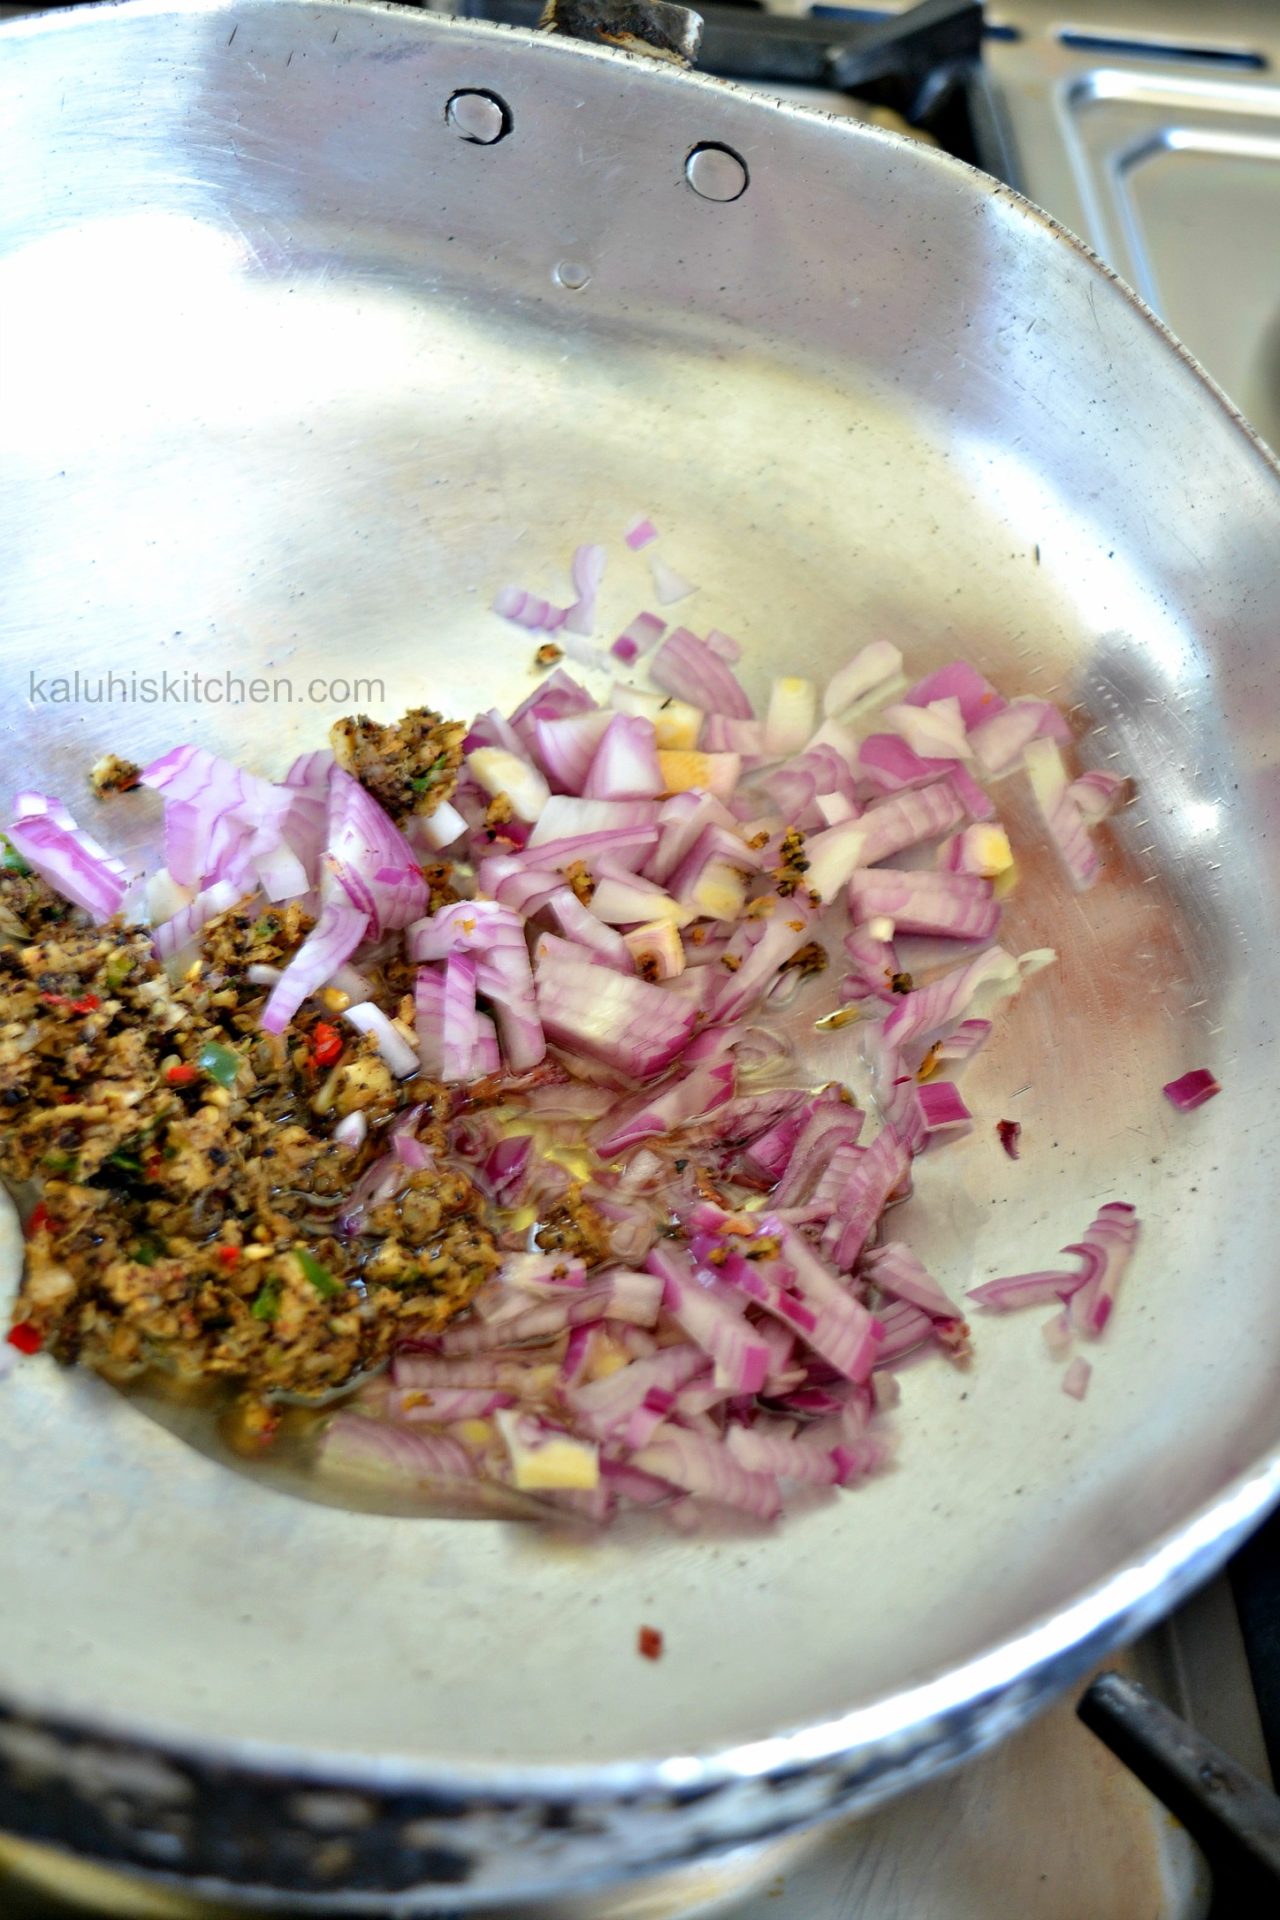 sautee the red onion together with the garlic chilli paste you have made so that the flavors develop_kaluhiskitchen.com